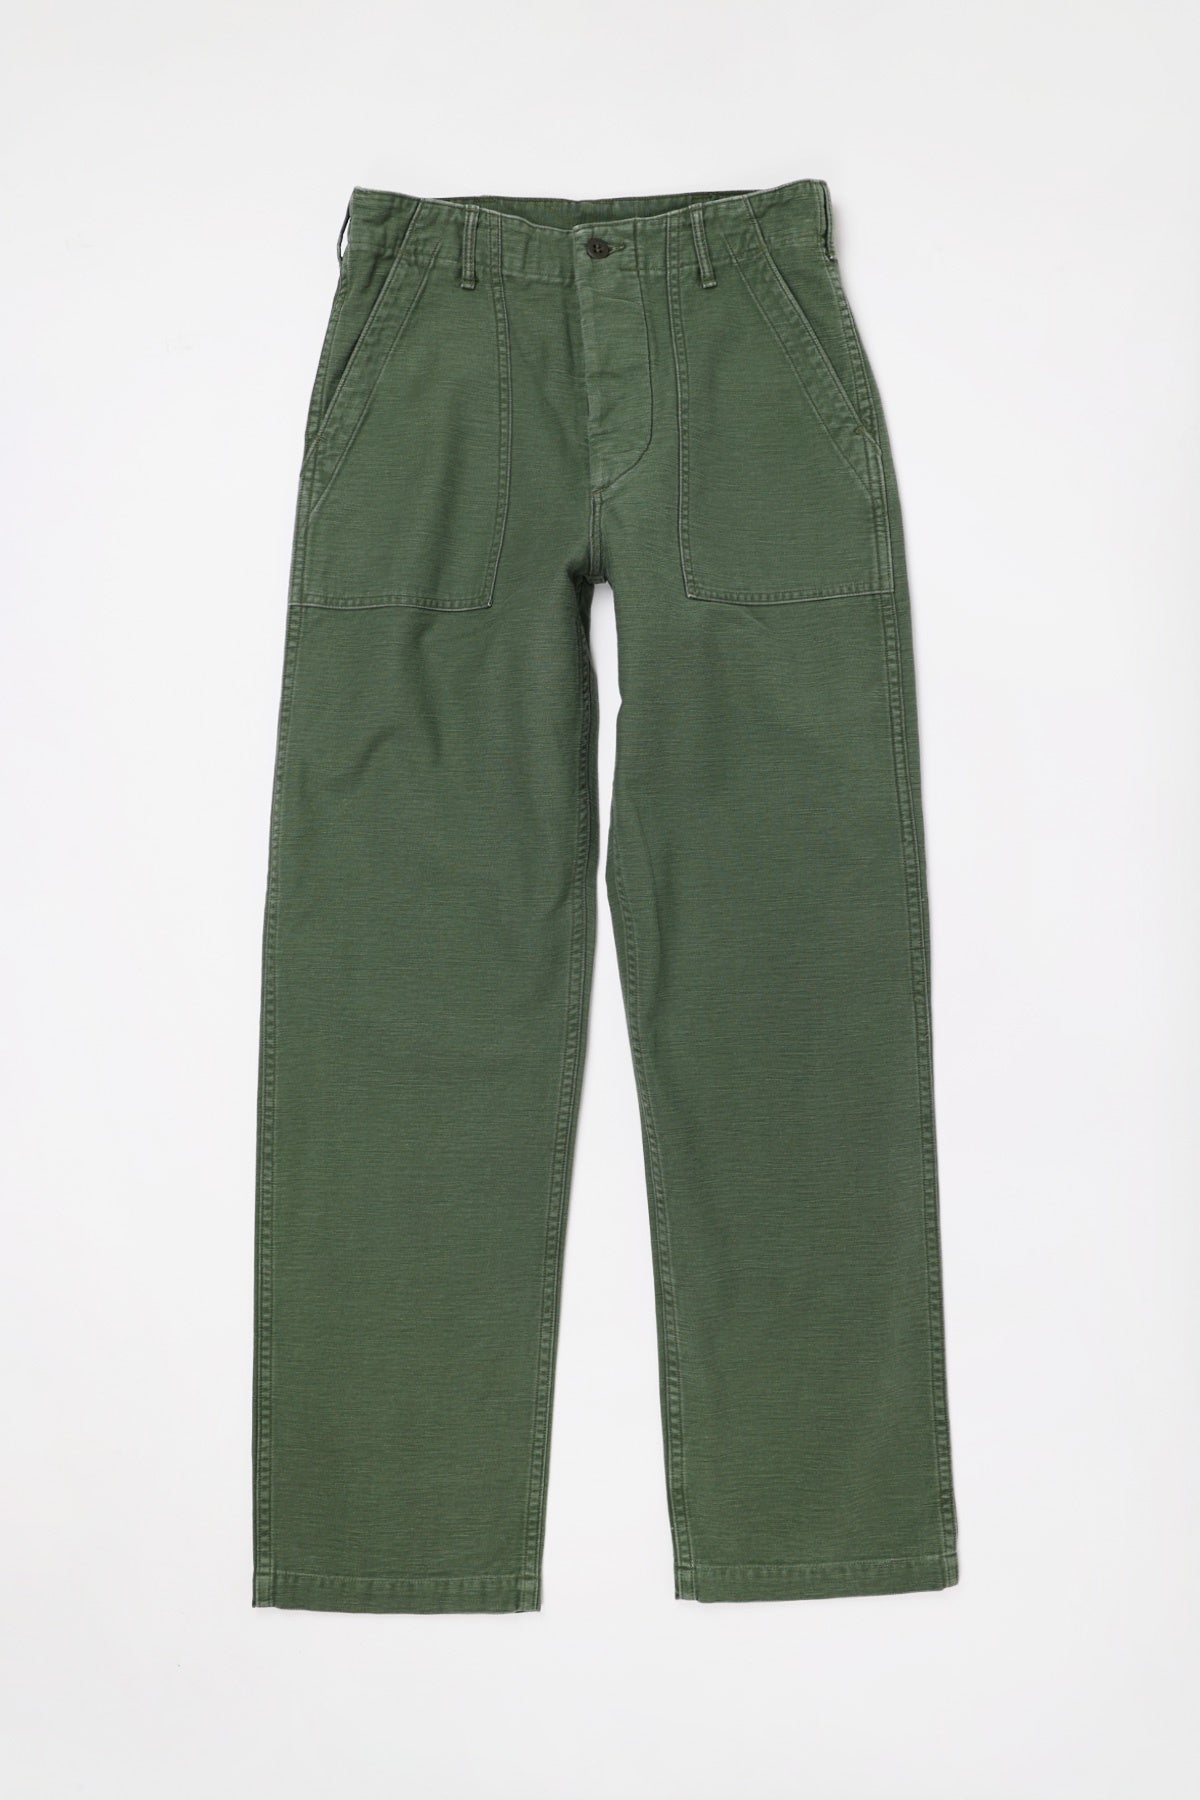 US Army Fatigue Pants (Regular Fit) - Green Used